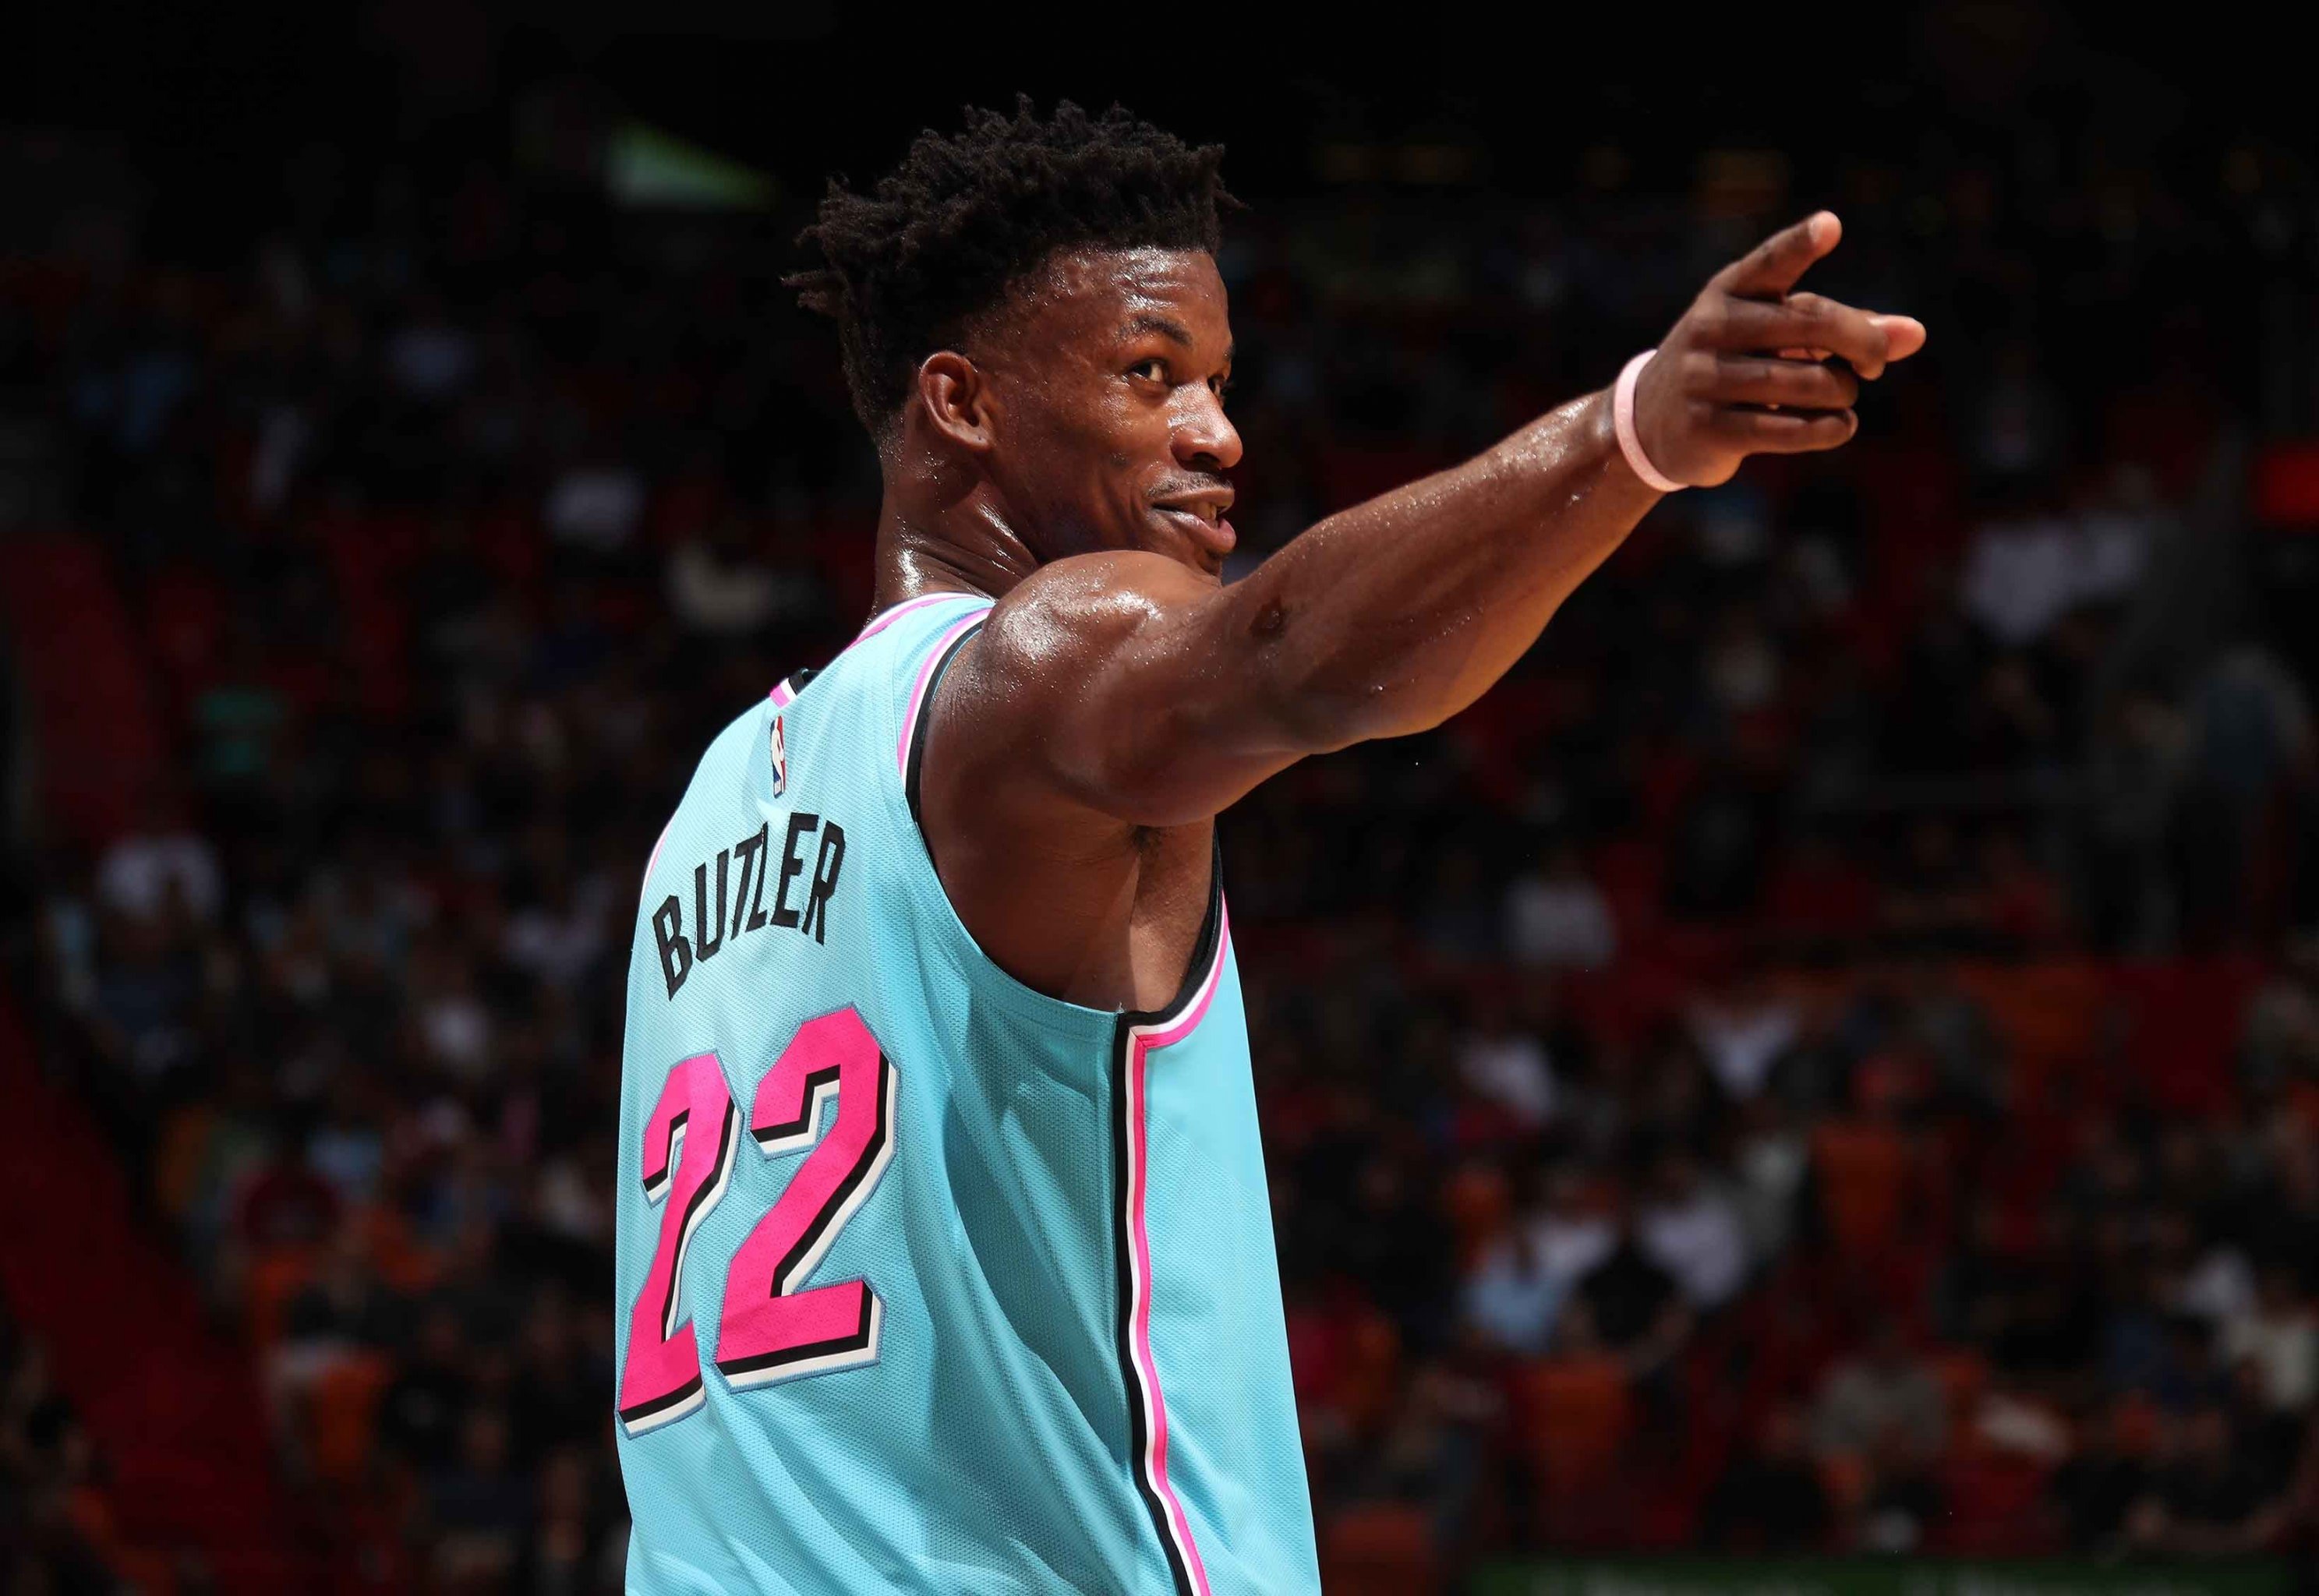 Welcome back: Butler scores 30, Heat hold off Kings 105-104 - The